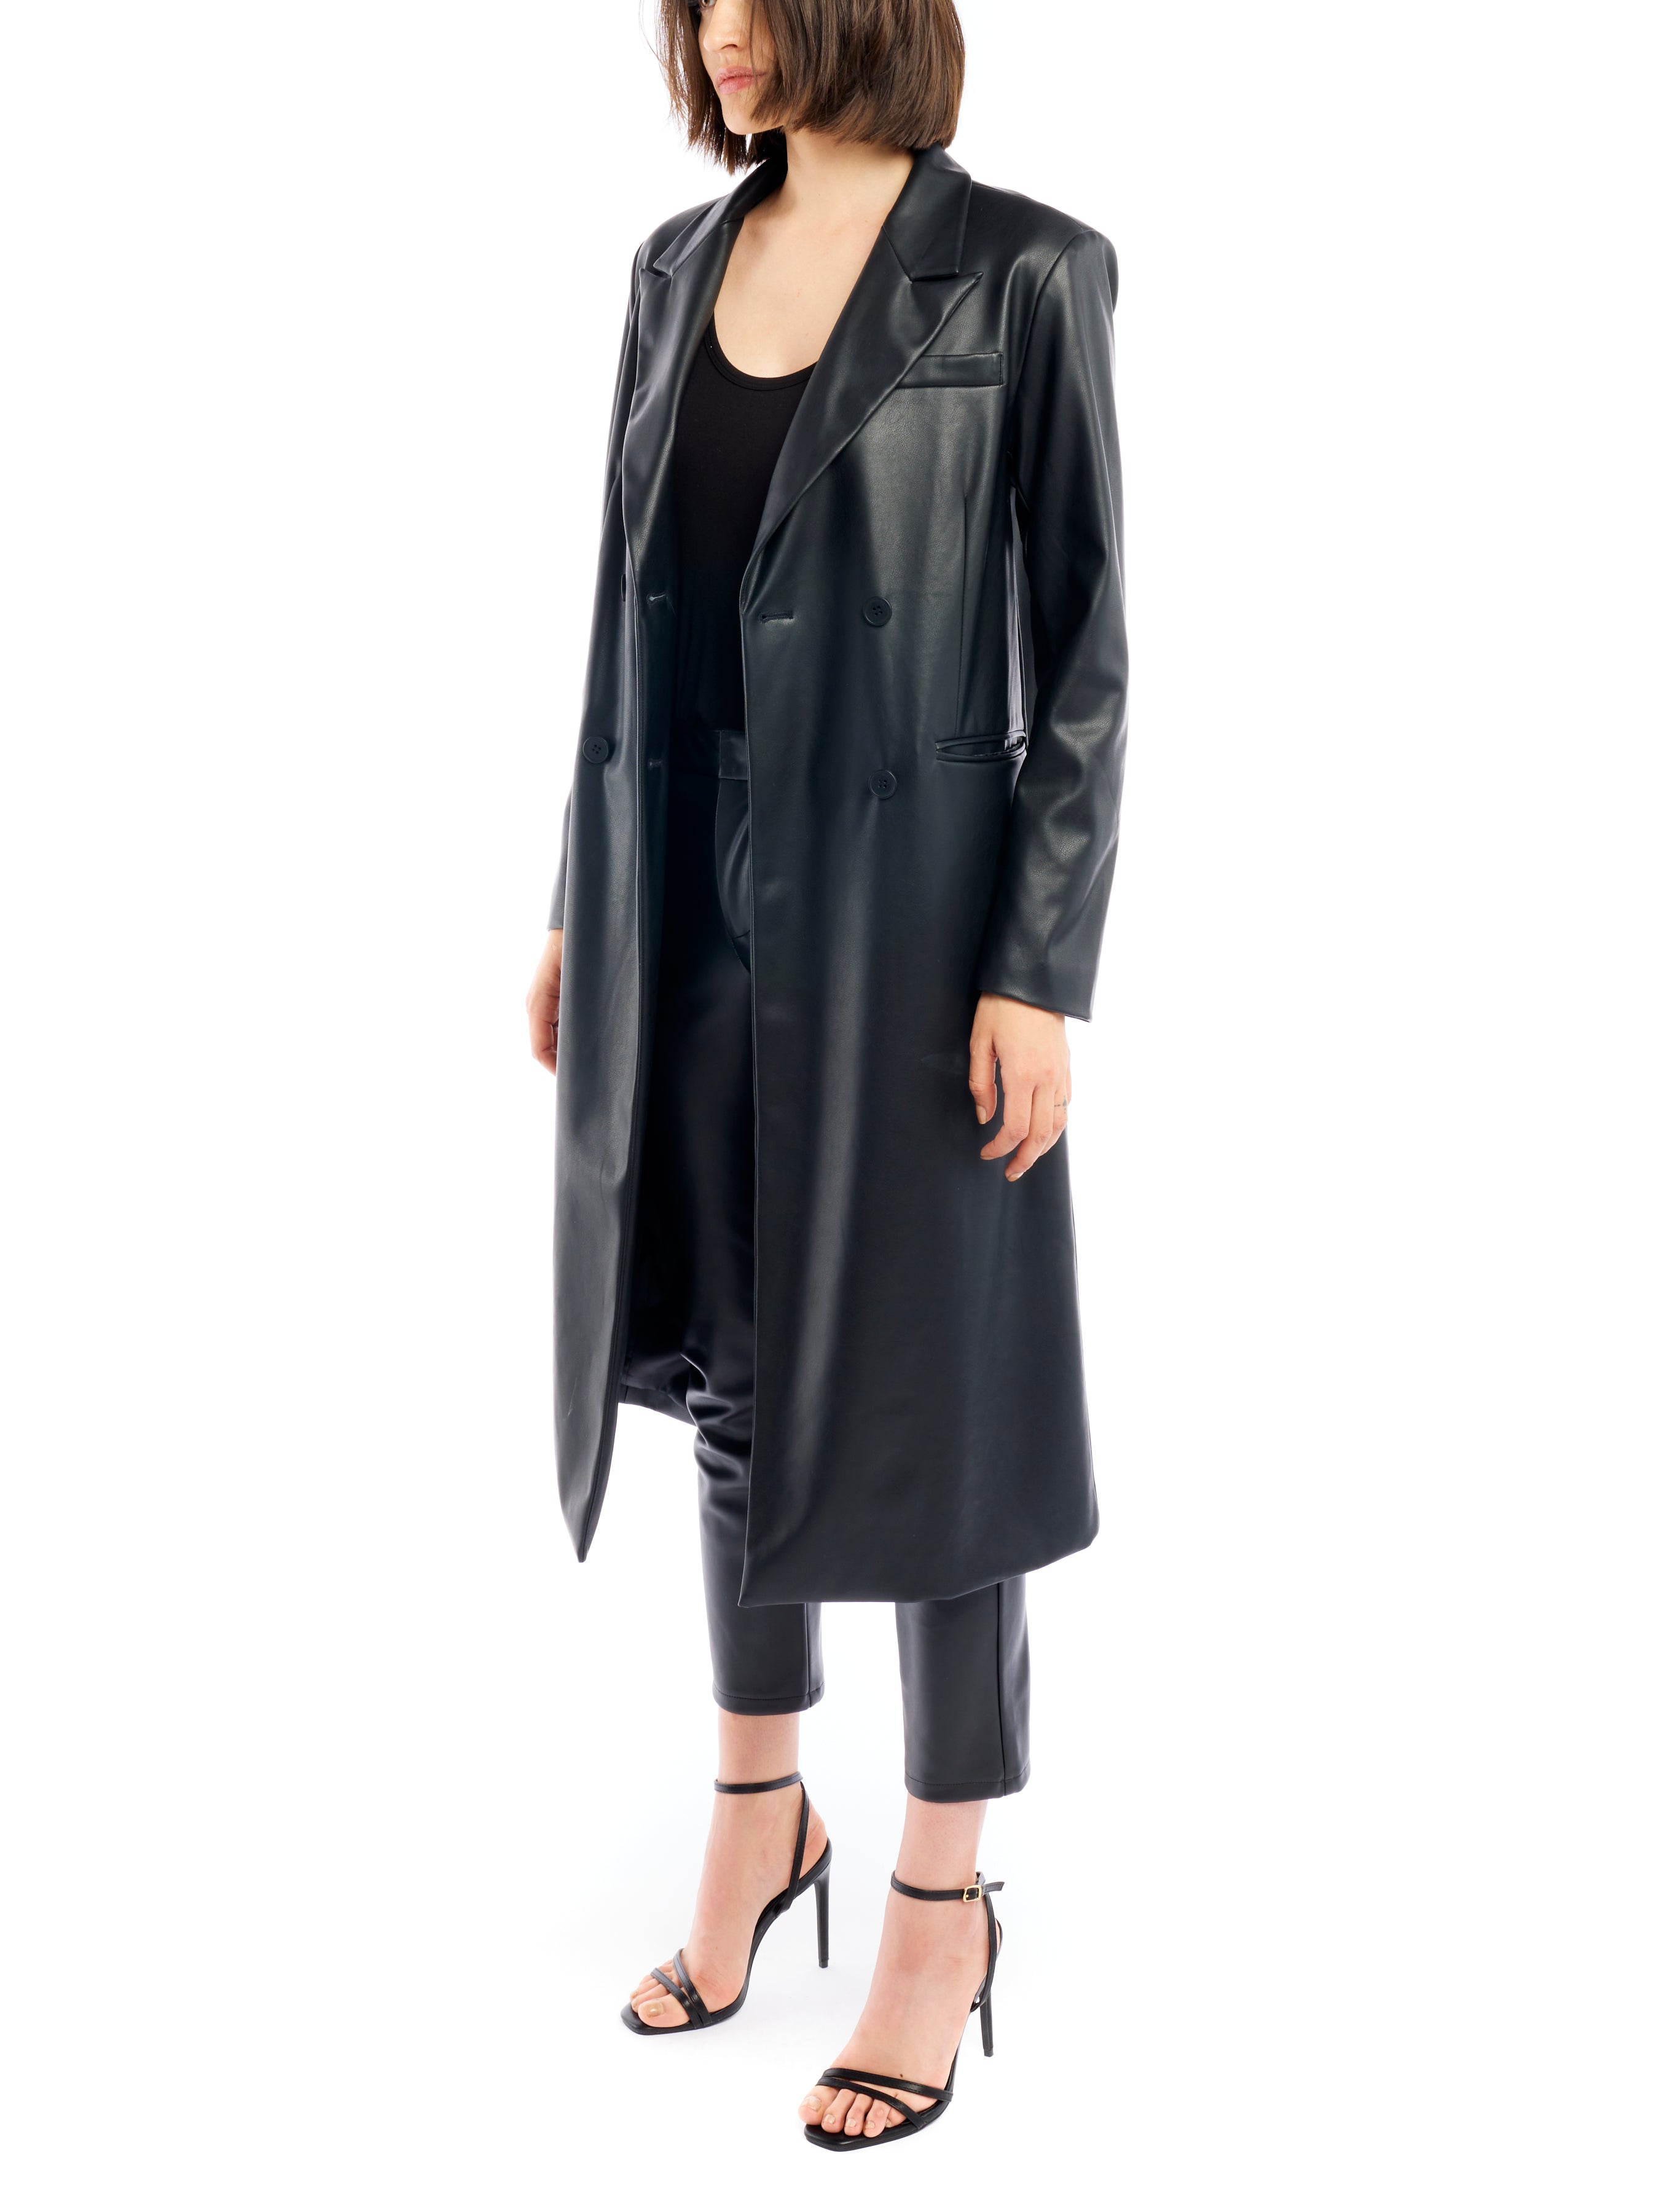 Midi length, double breasted, vegan leather jacket featuring long sleeves and pockets